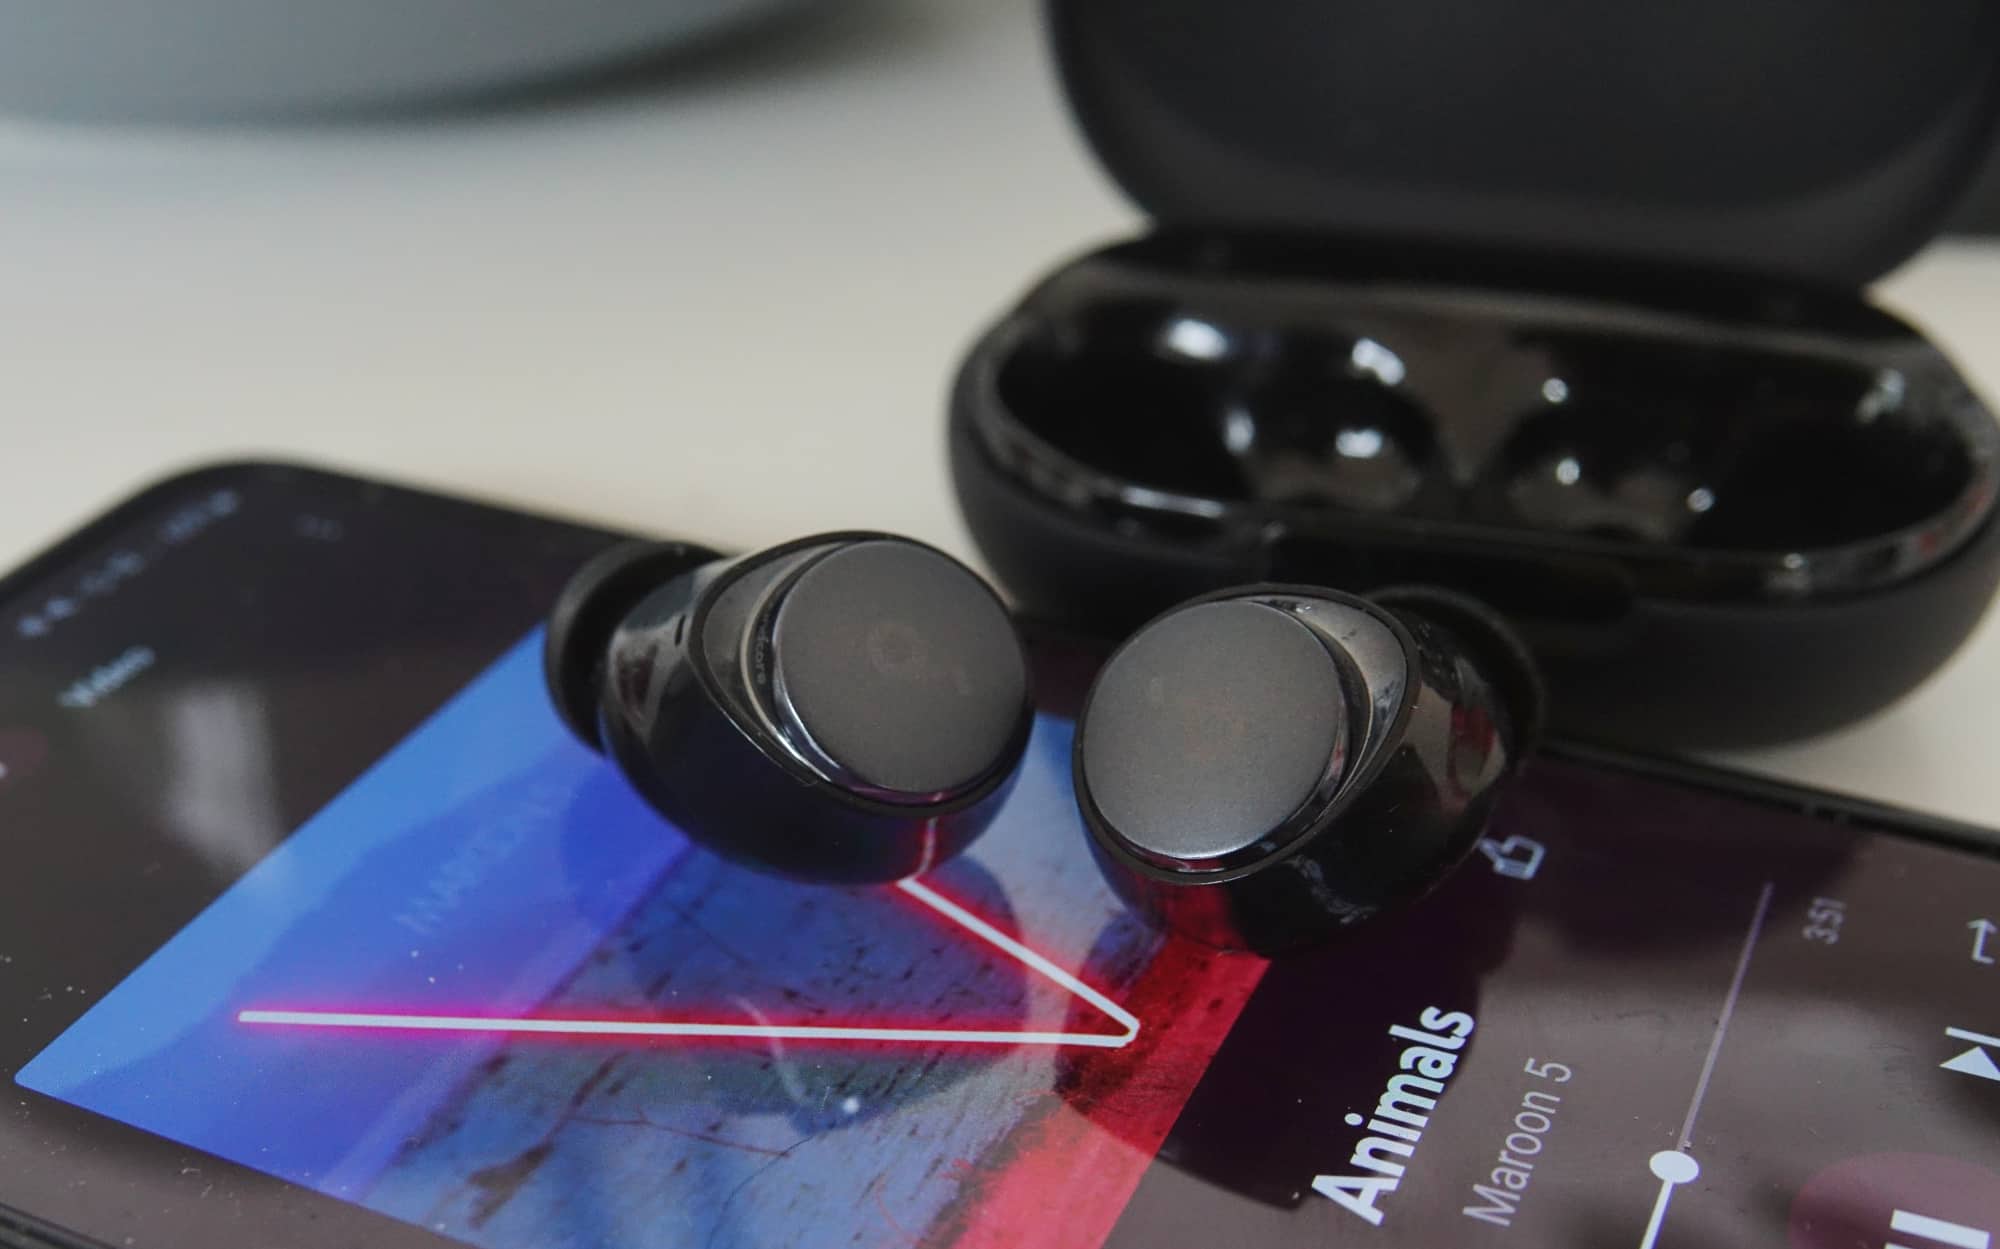 Anker Soundcore Space A40 Review: Great Budget Wireless Earbuds